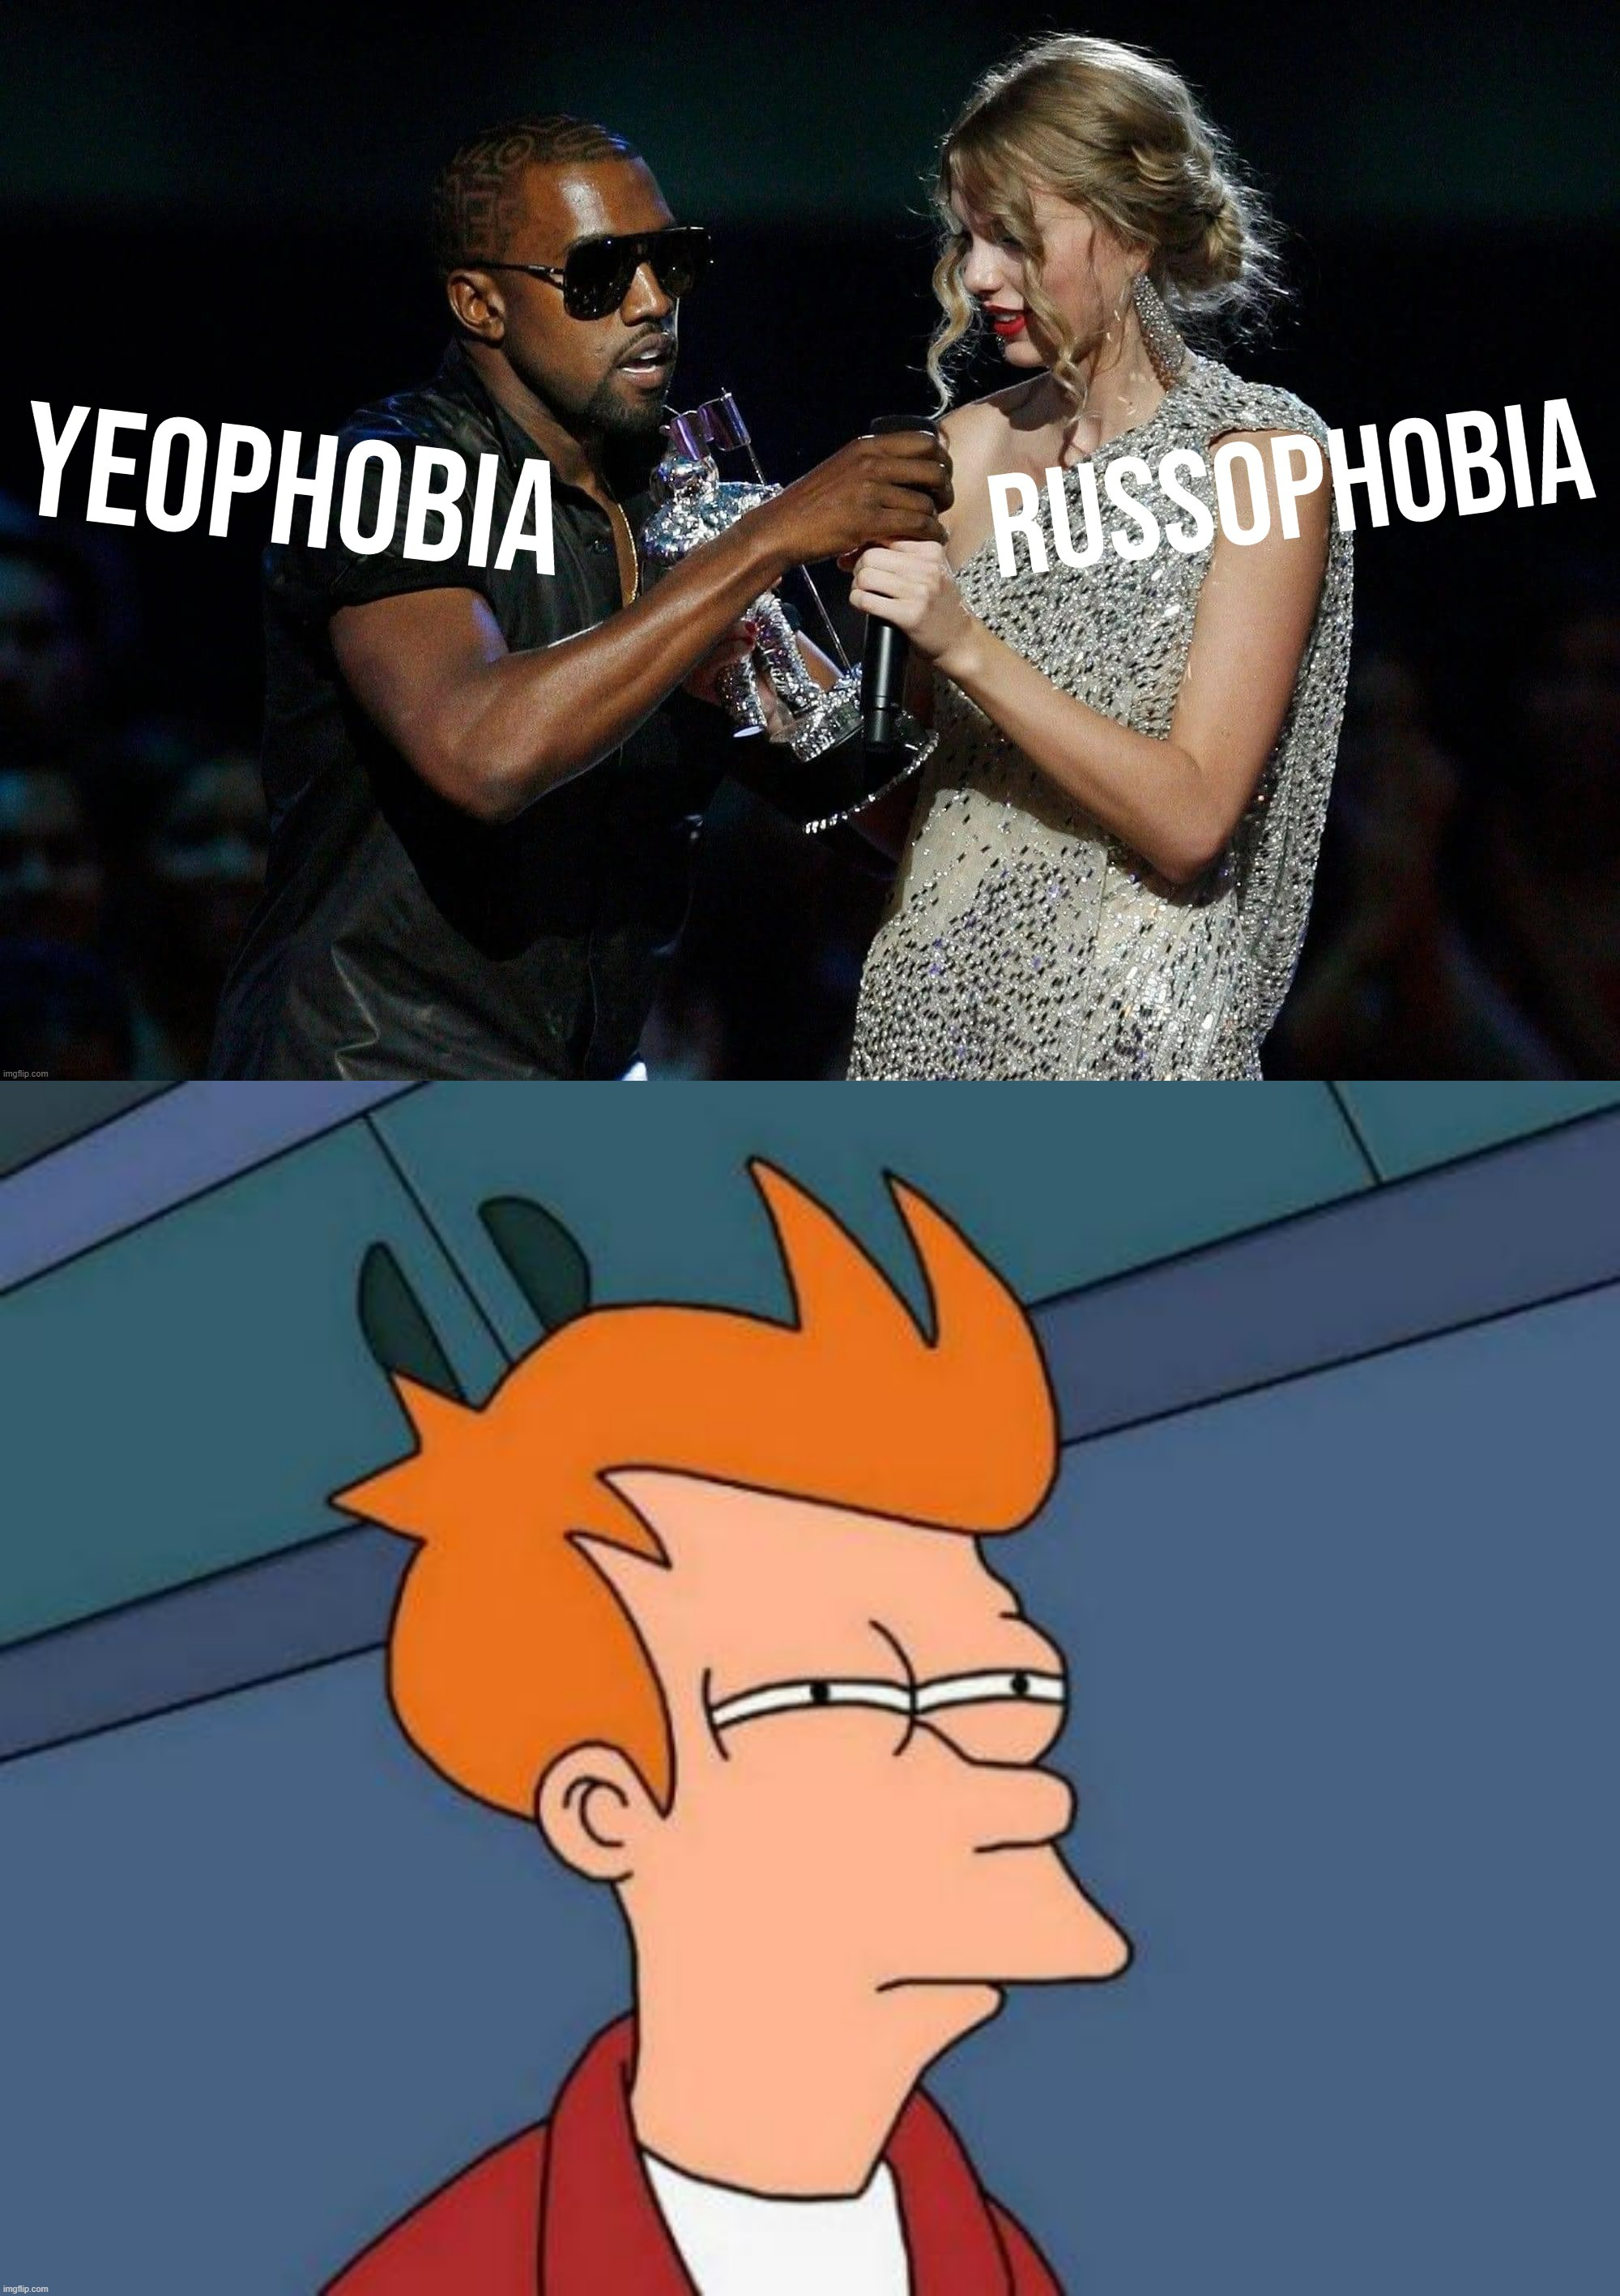 Not sure if meme will make sense to anyone outside of I_P's esoteric community | image tagged in yeophobia vs russophobia,yeophobia,russophobia,yeophobic,russophobic,meanwhile on imgflip_presidents | made w/ Imgflip meme maker